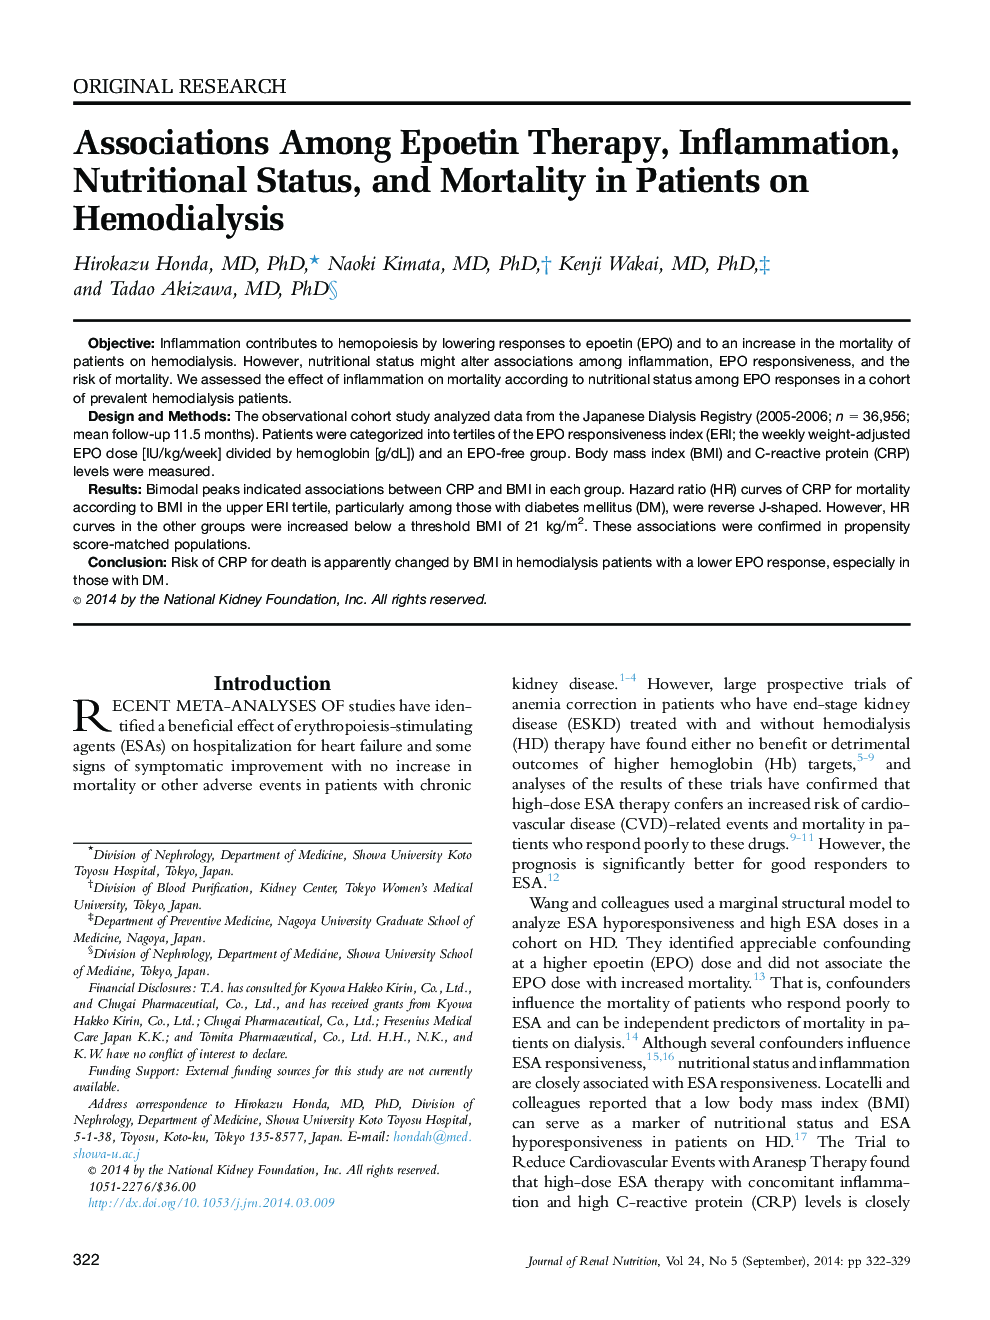 Associations Among Epoetin Therapy, Inflammation, Nutritional Status, and Mortality in Patients on Hemodialysis